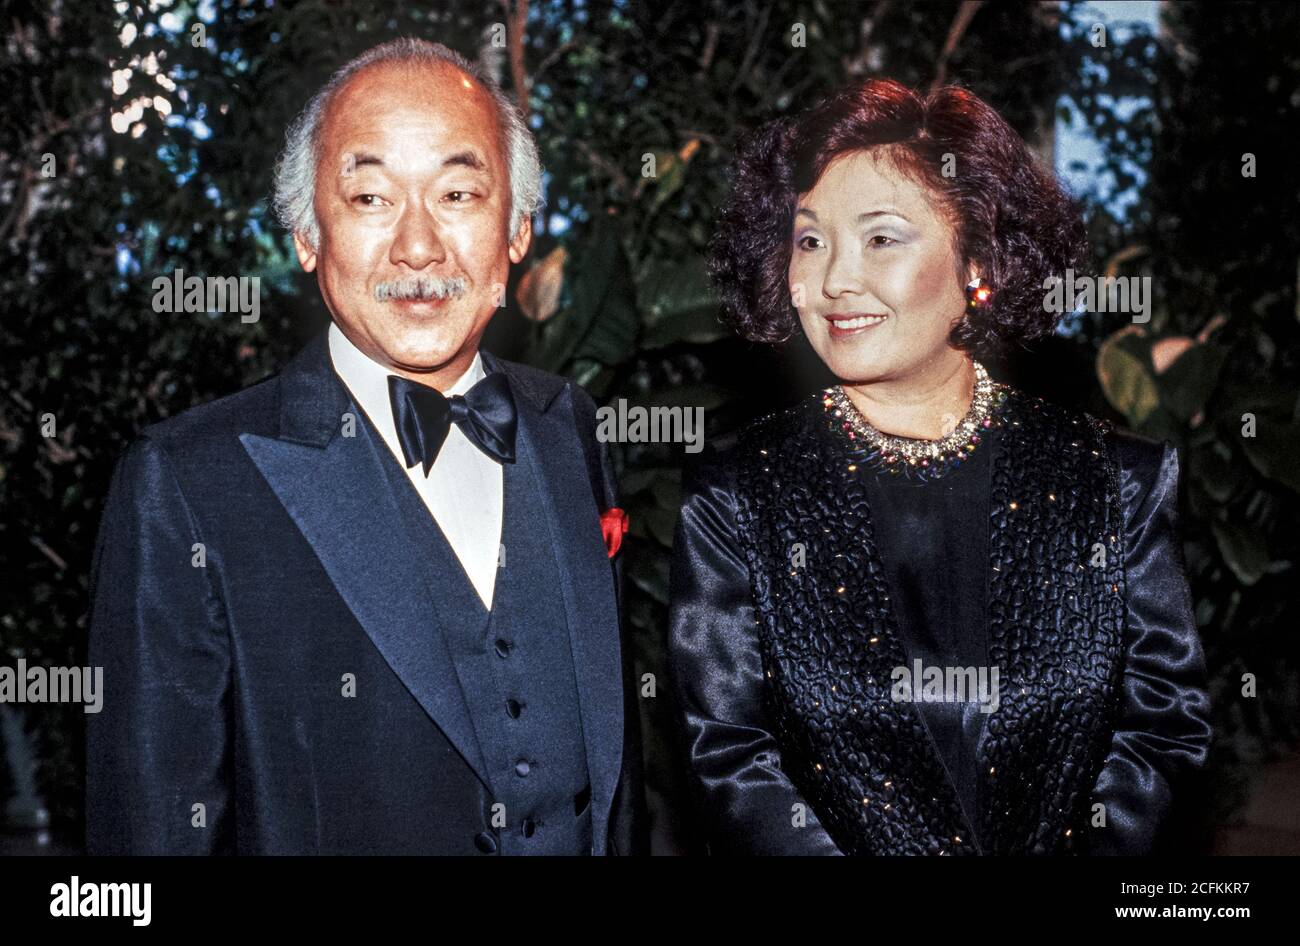 American actor Noriyuki 'Pat' Morita and his wife, Yukiye “Yuki” Kitahara, arrive at the White House in Washington, DC for the State Dinner hosted by United States President Ronald Reagan and first lady Nancy Reagan in honor of Prime Minister Yasuhiro Nakasone of Japan on April 30, 1987.Credit: Ron Sachs/CNP | usage worldwide Stock Photo